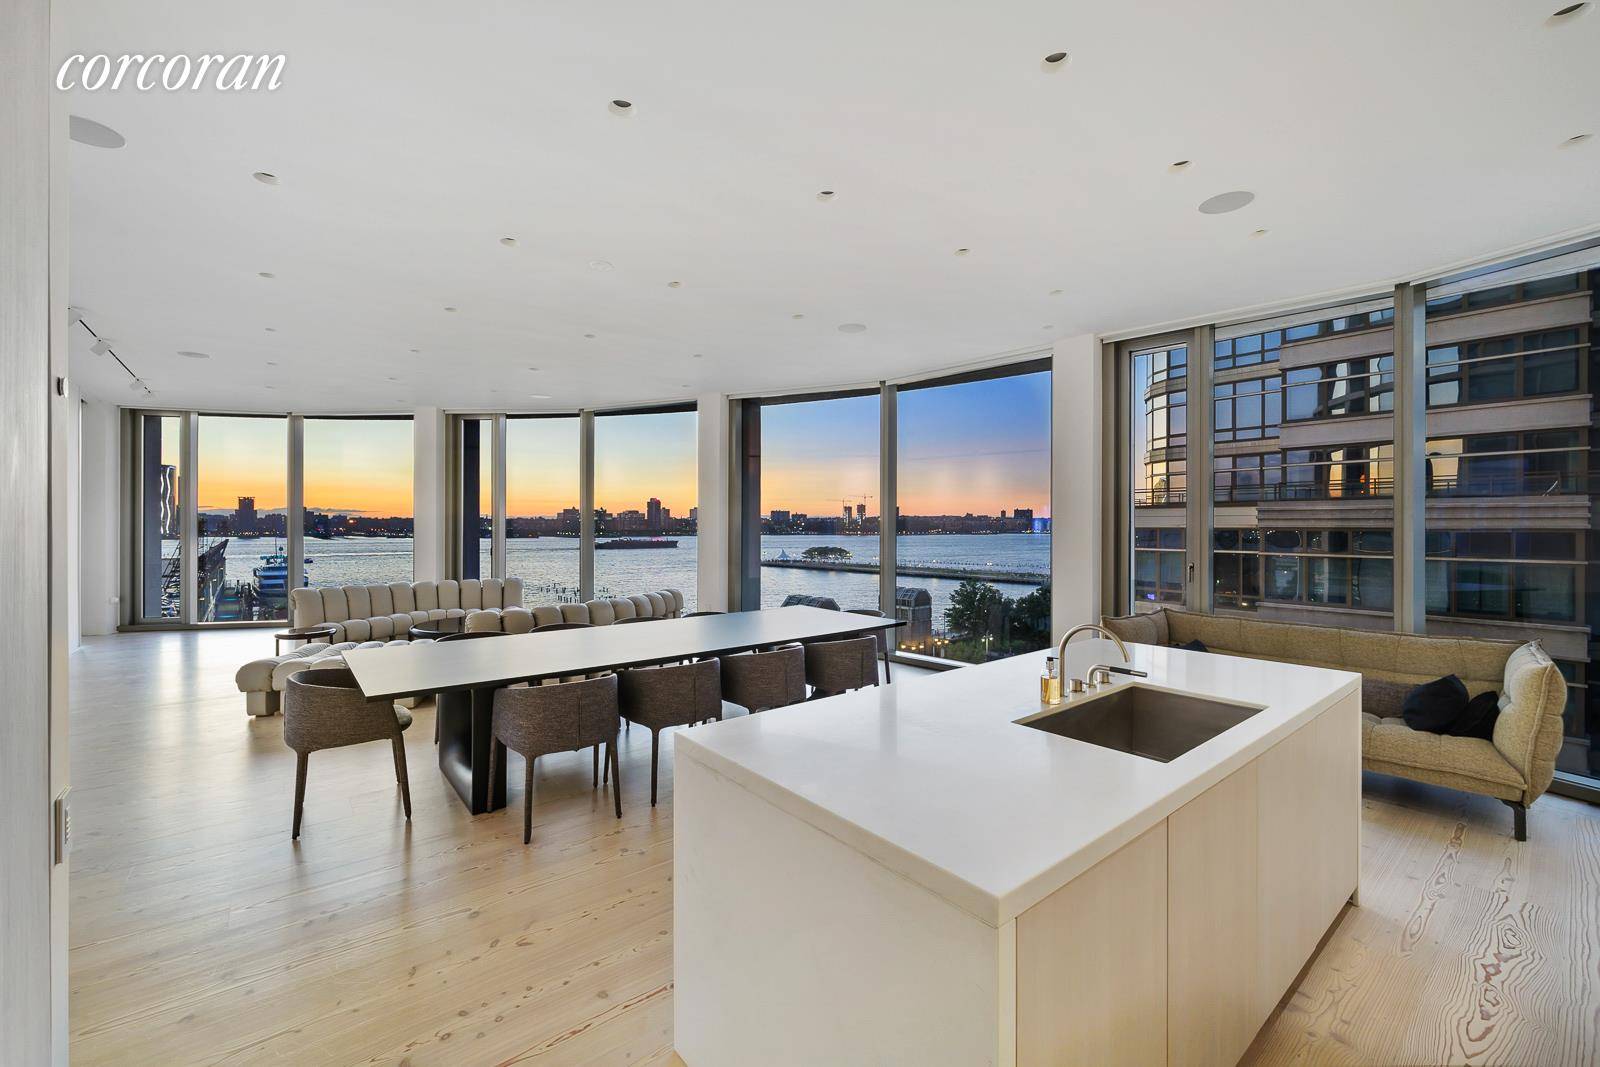 A sprawling high floor 2792sqft 4 bedroom residence with glittering, unobstructed Hudson River views is available at 160 Leroy, the West Village's most successful new development condominium.